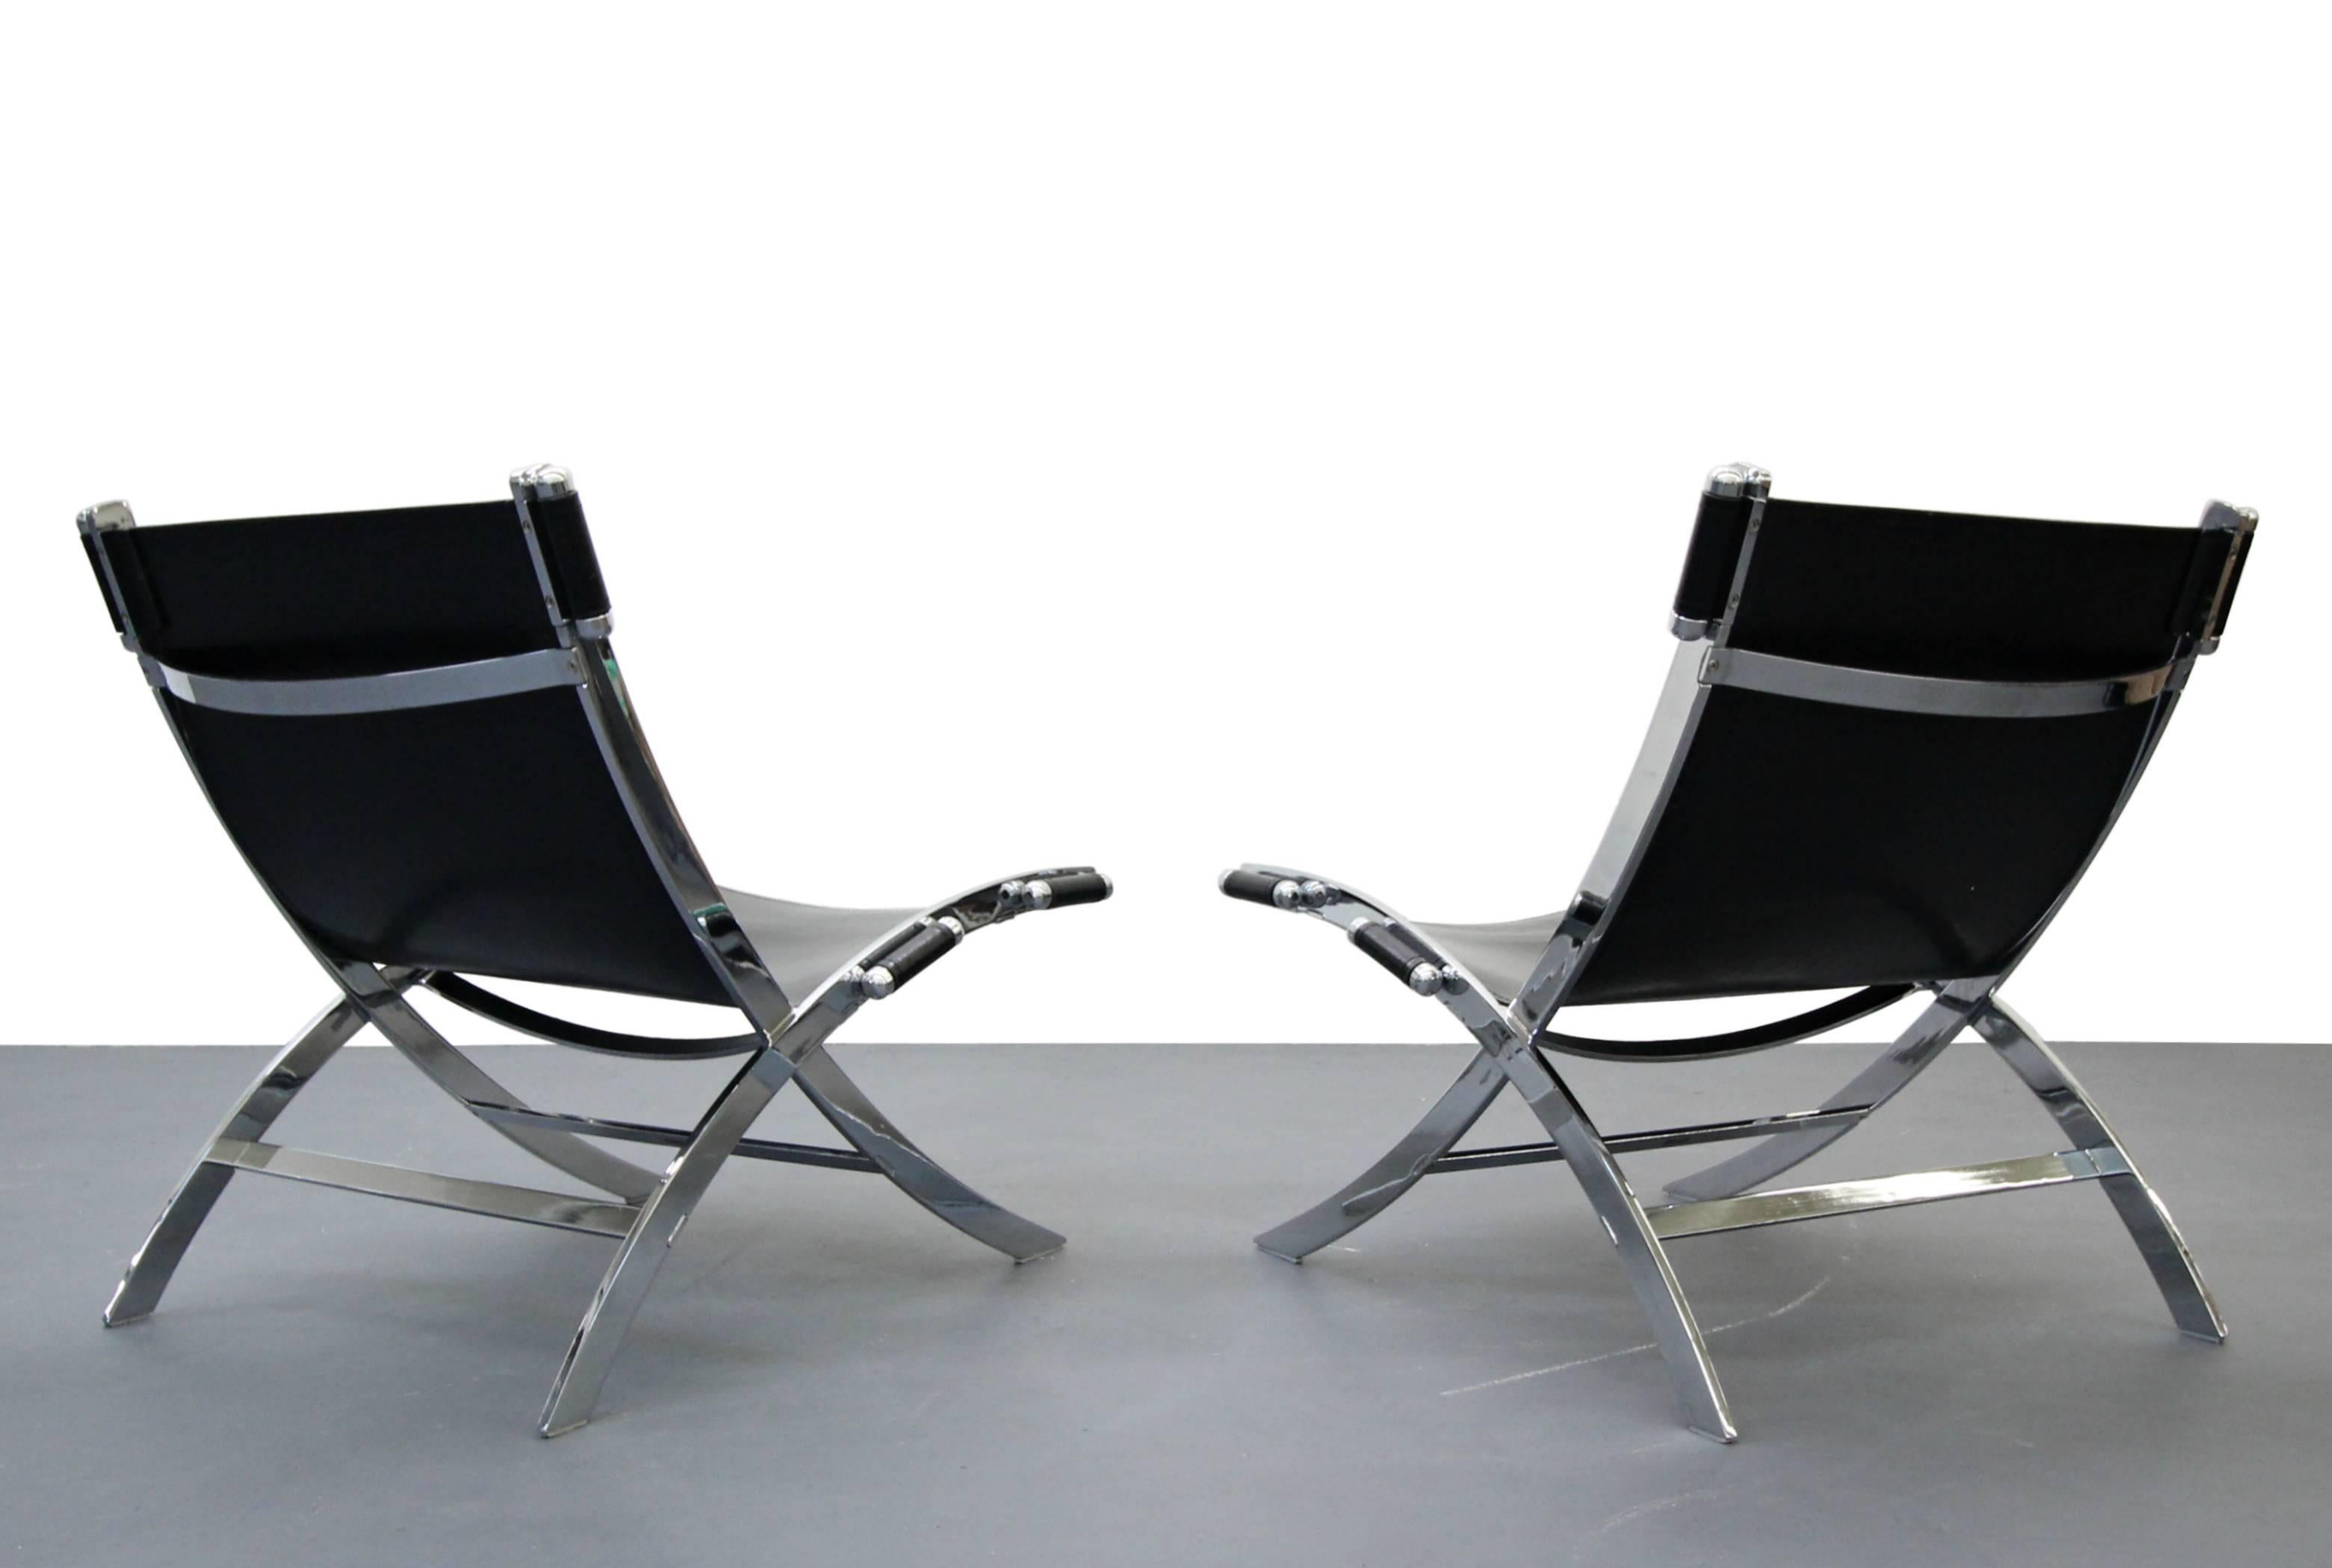 Substantial pair of midcentury Italian chrome and leather sling scissor chairs. This gorgeous pair of chairs is heavy duty, weighing close to 75lbs a piece. They are constructed out of solid steel and thick genuine leather. These chairs are very